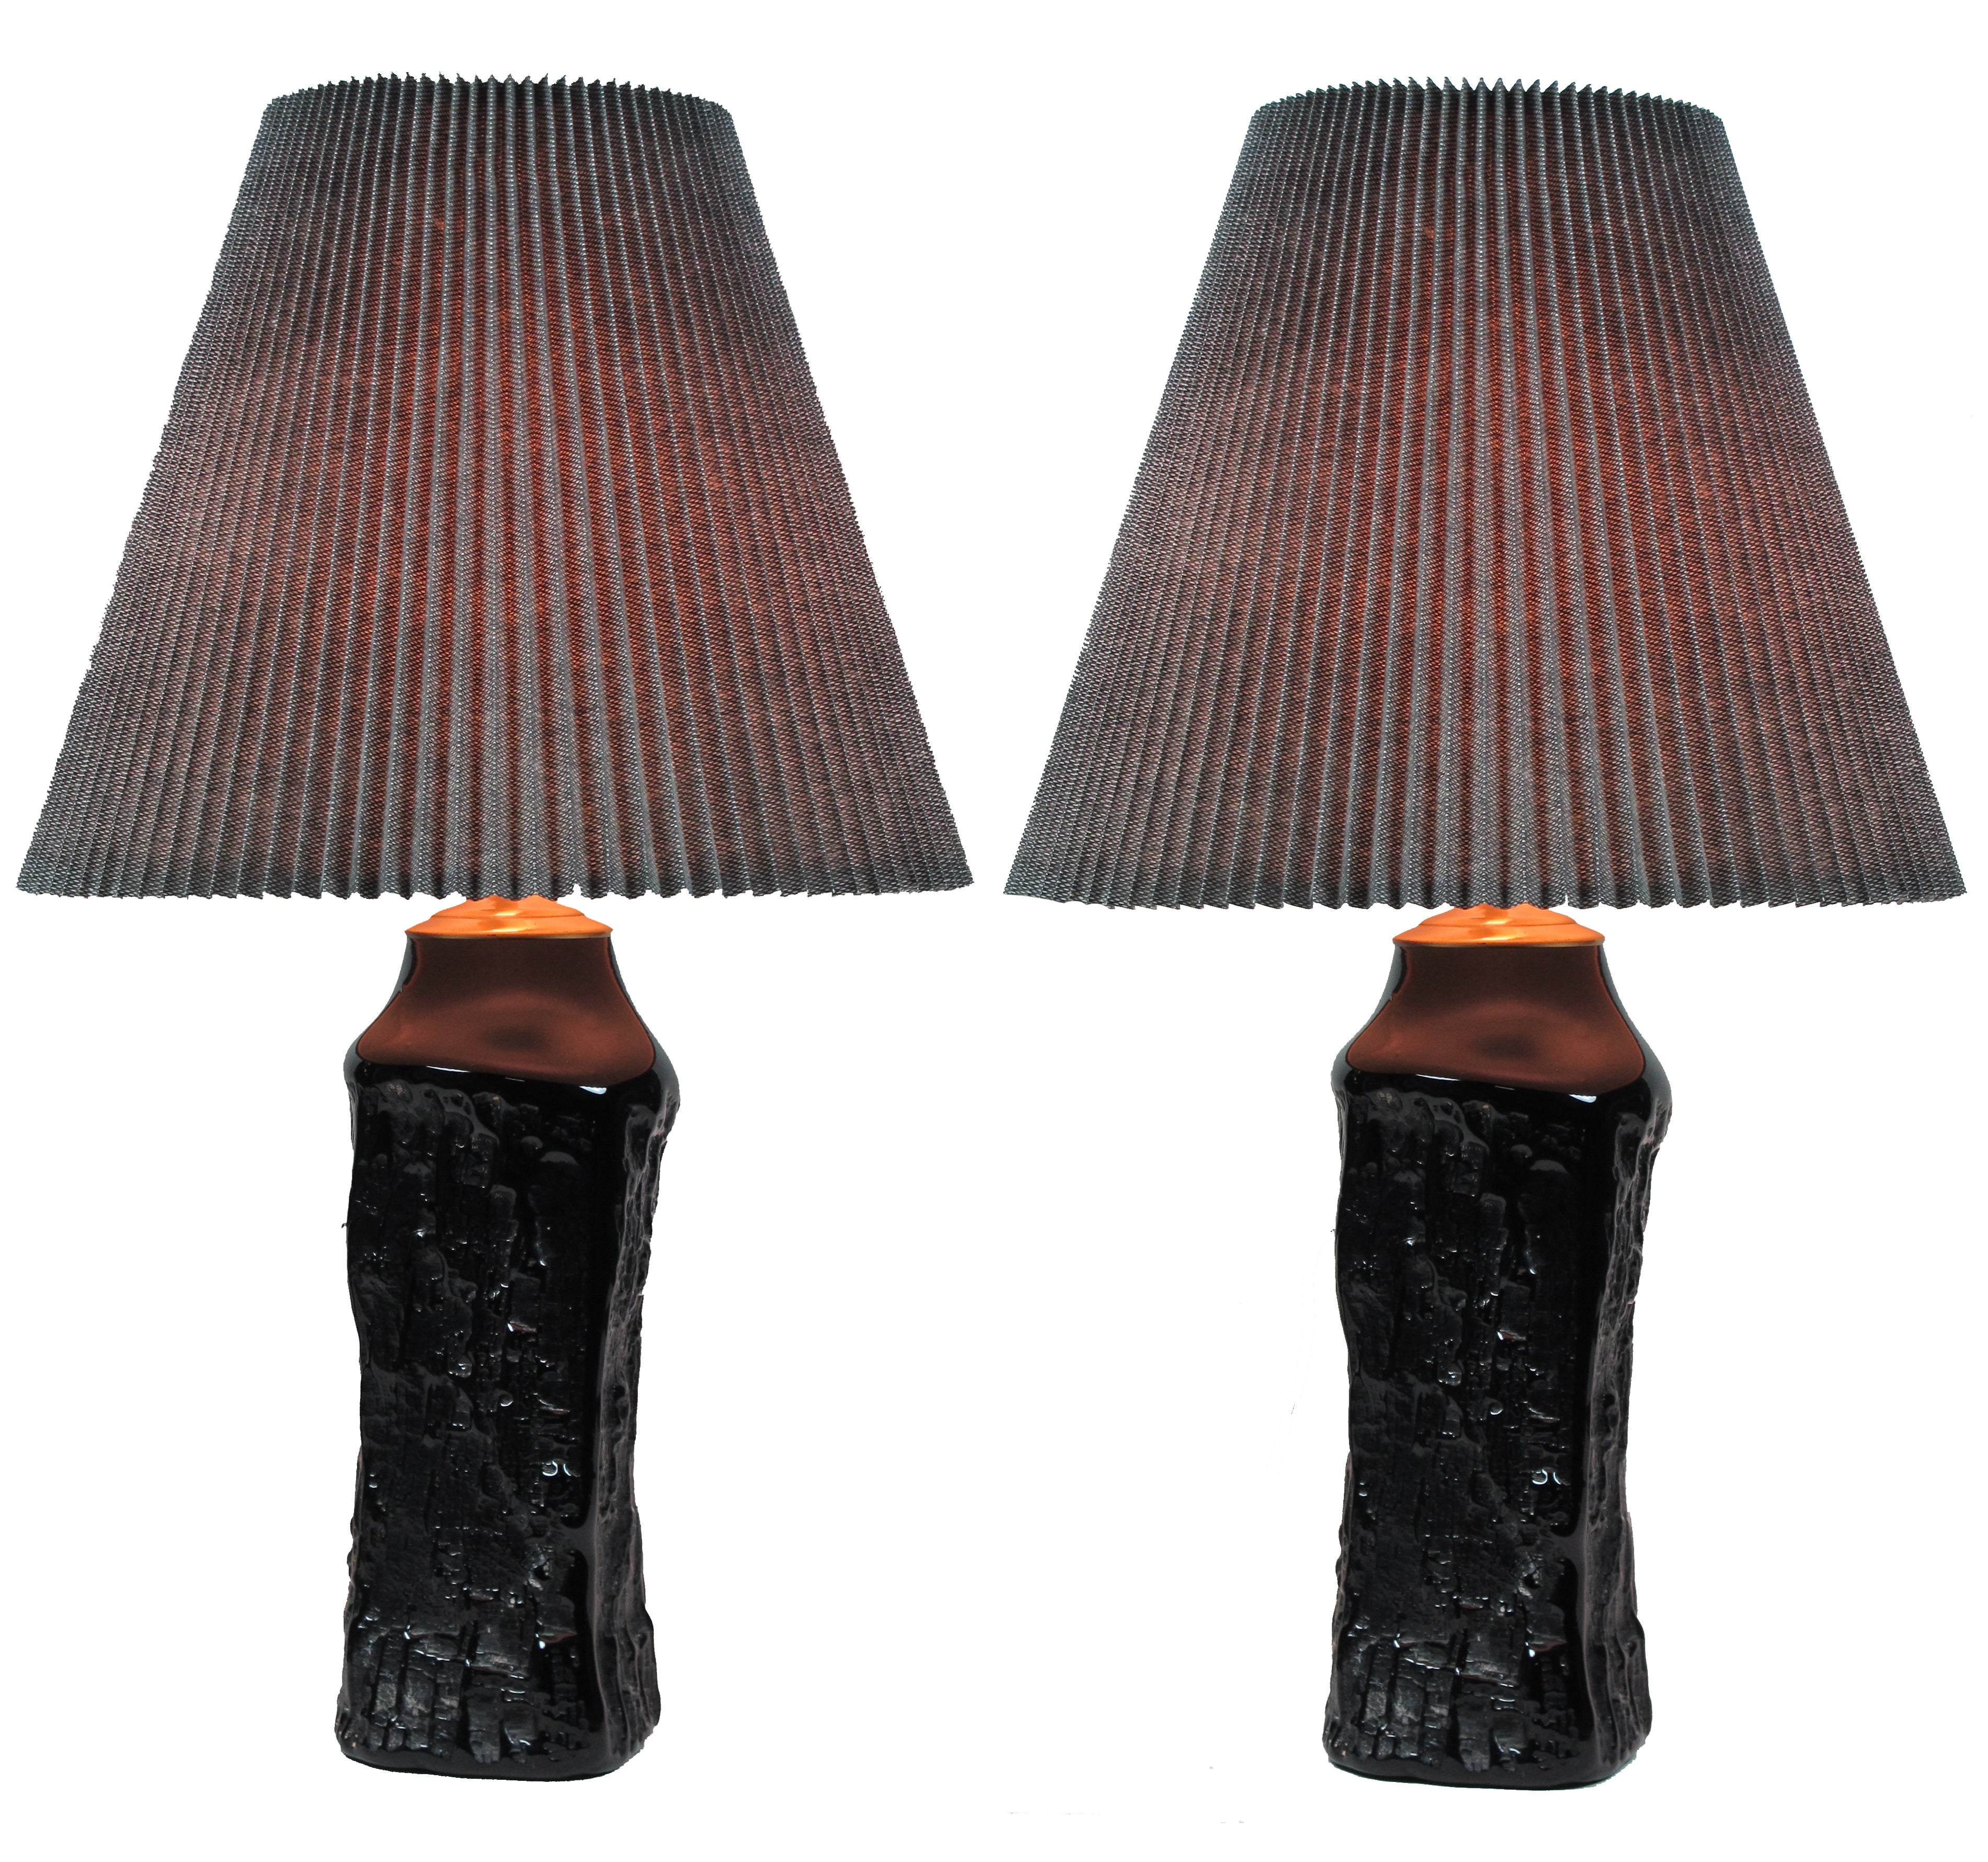 Pair of Mold Blown Black Glass Table Lamps by Querandi